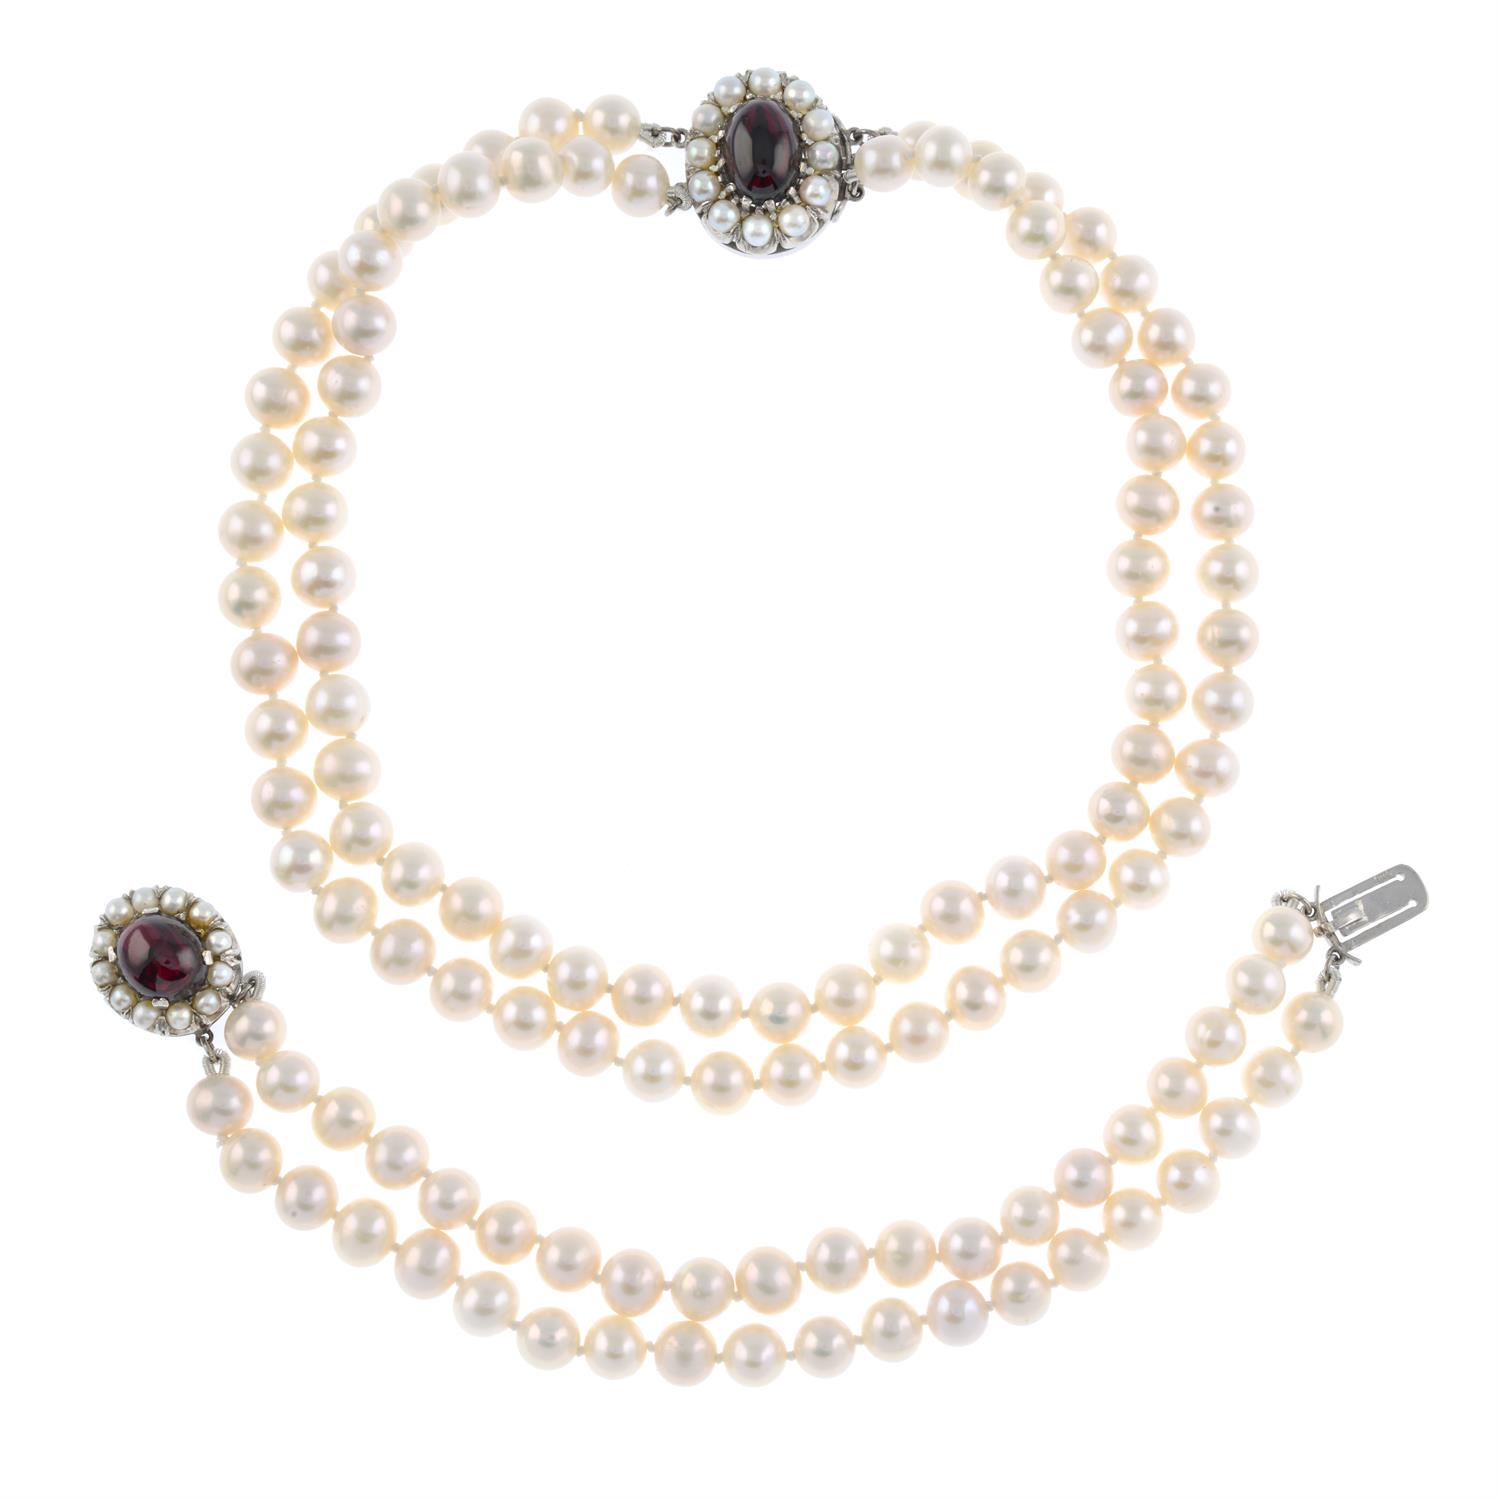 Cultured pearl two-row necklace and bracelet - Image 2 of 6